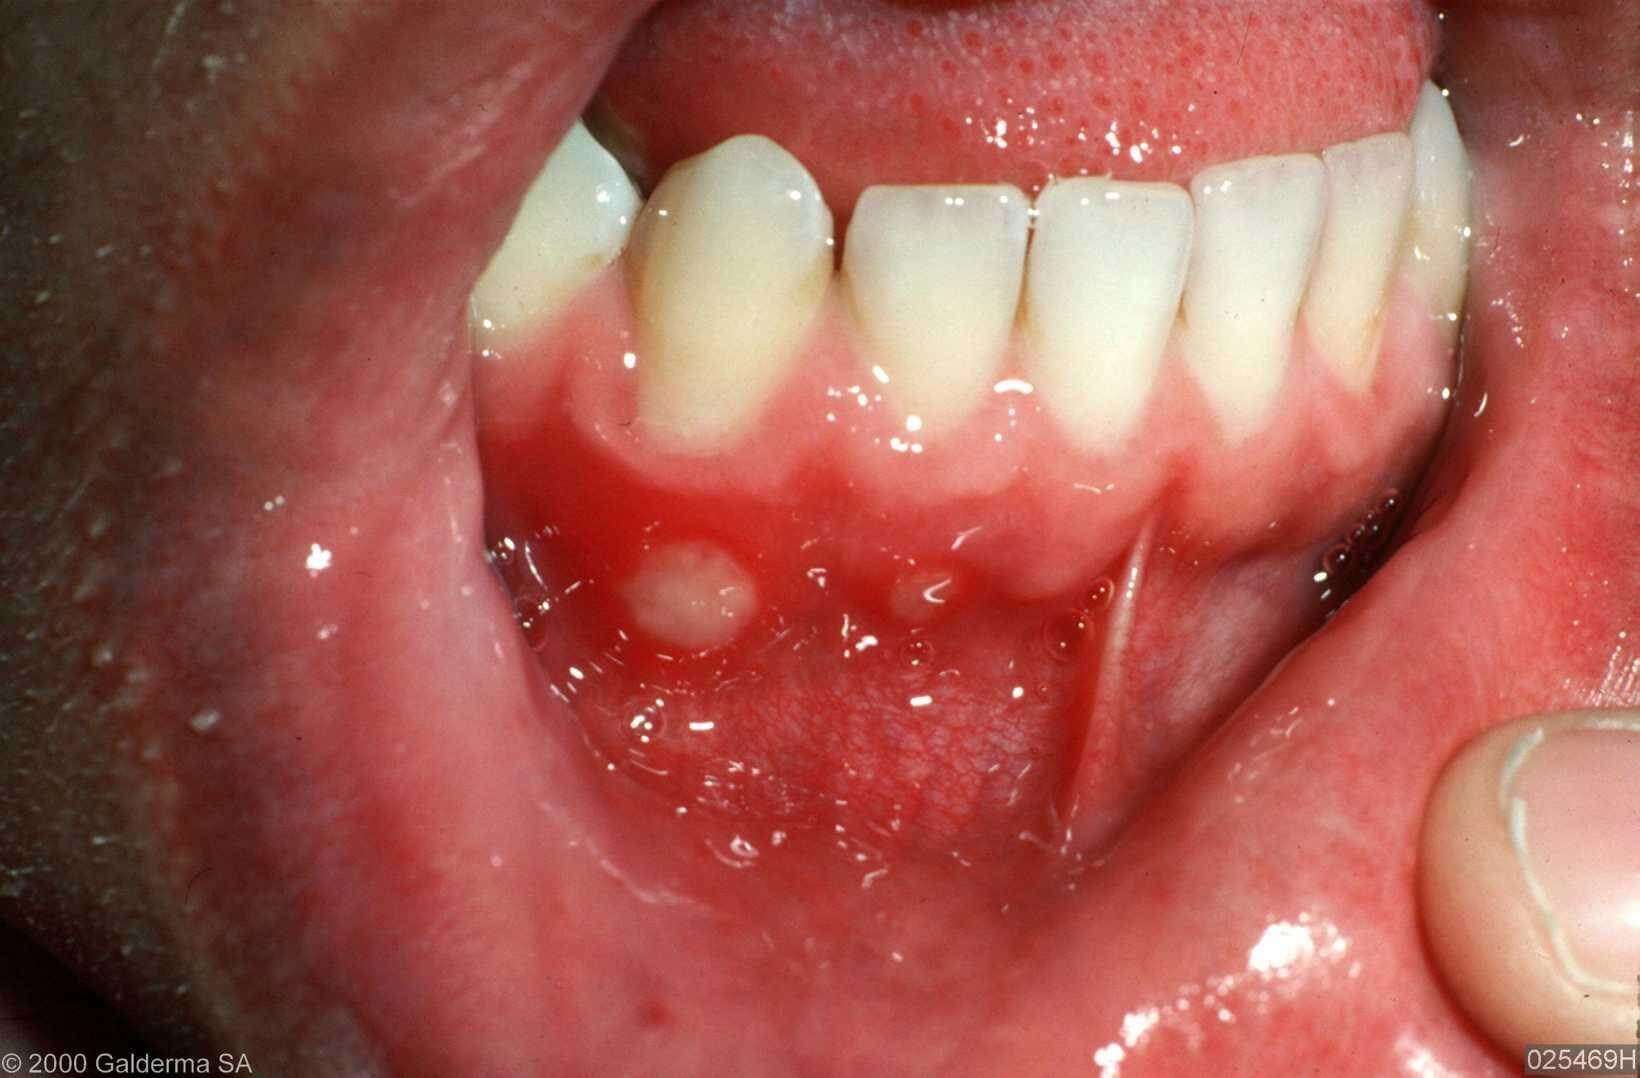 What Is the Best Treatment for Oral Herpes? - The GoodRx ...